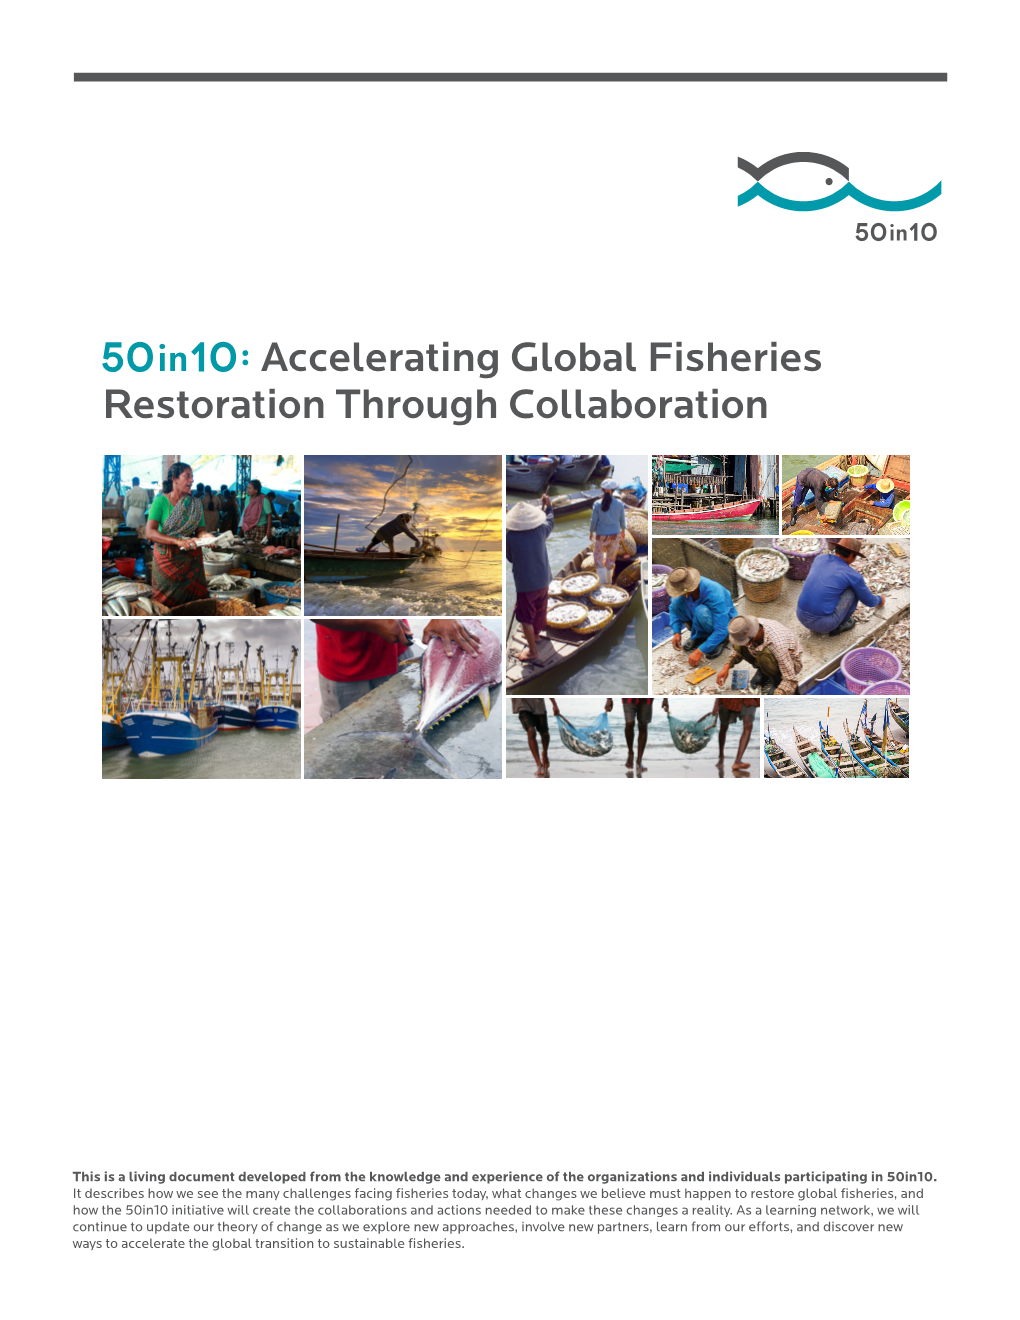 Accelerating Global Fisheries Restoration Through Collaboration